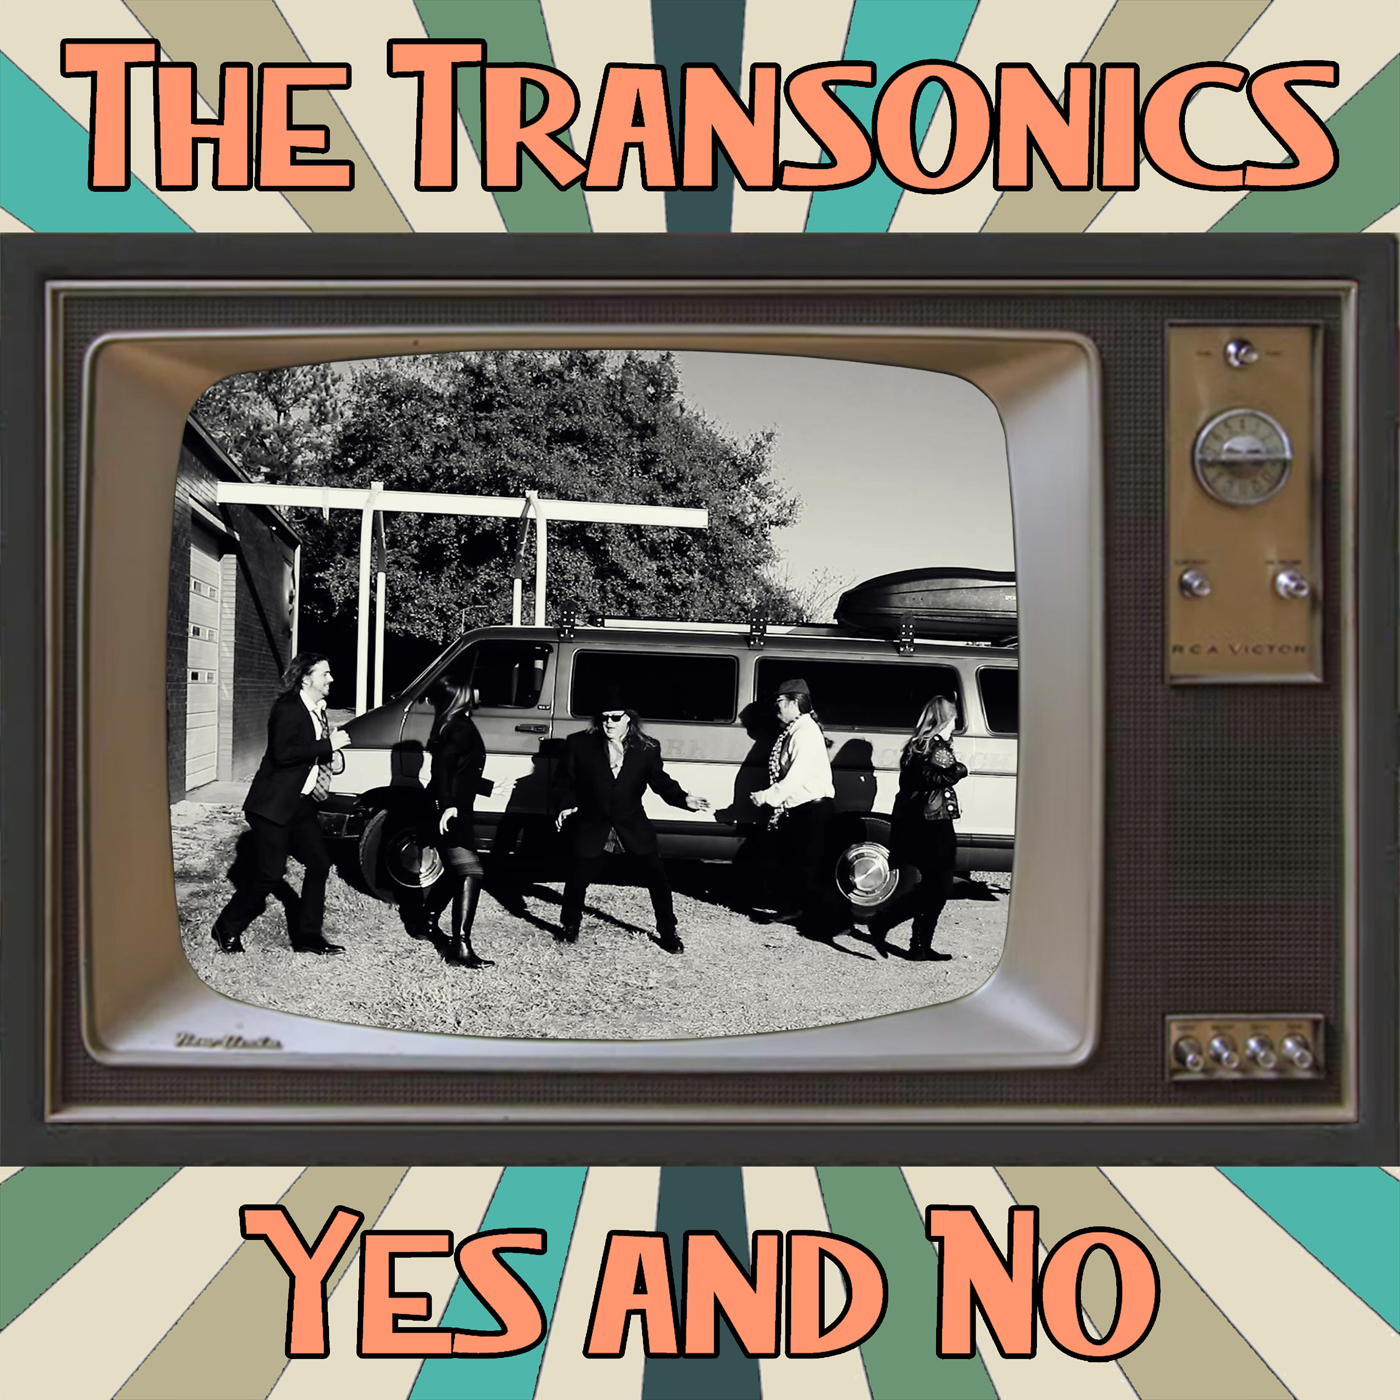 Cover art for The Transonics single, Yes and No